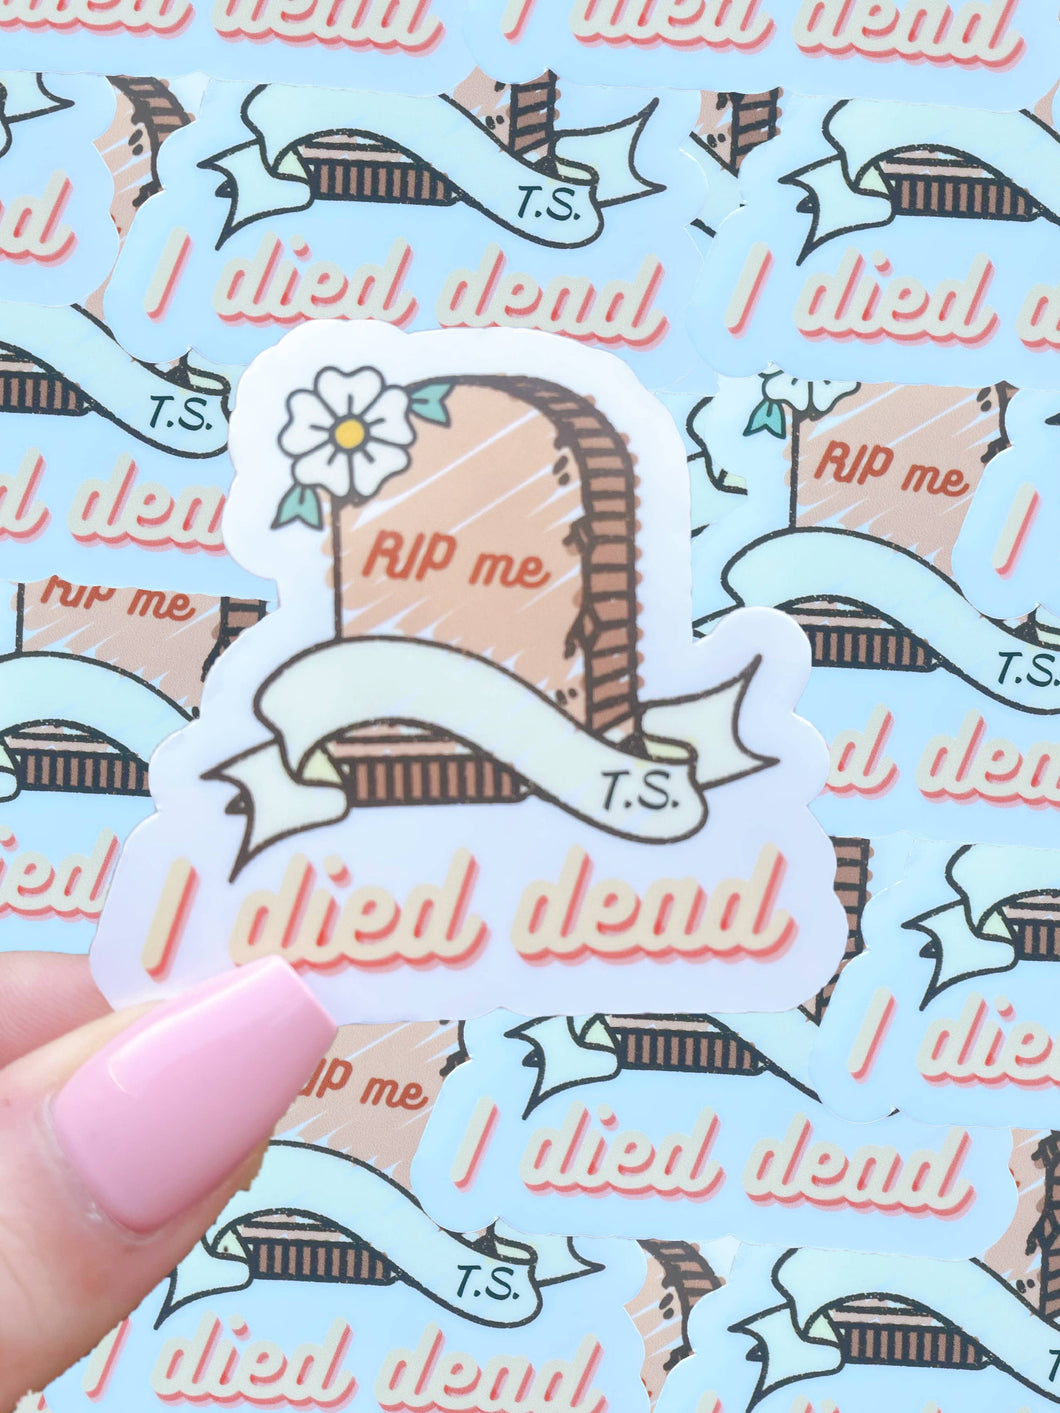 Taylor Swift inspired waterproof quote sticker  - Died I'm dead